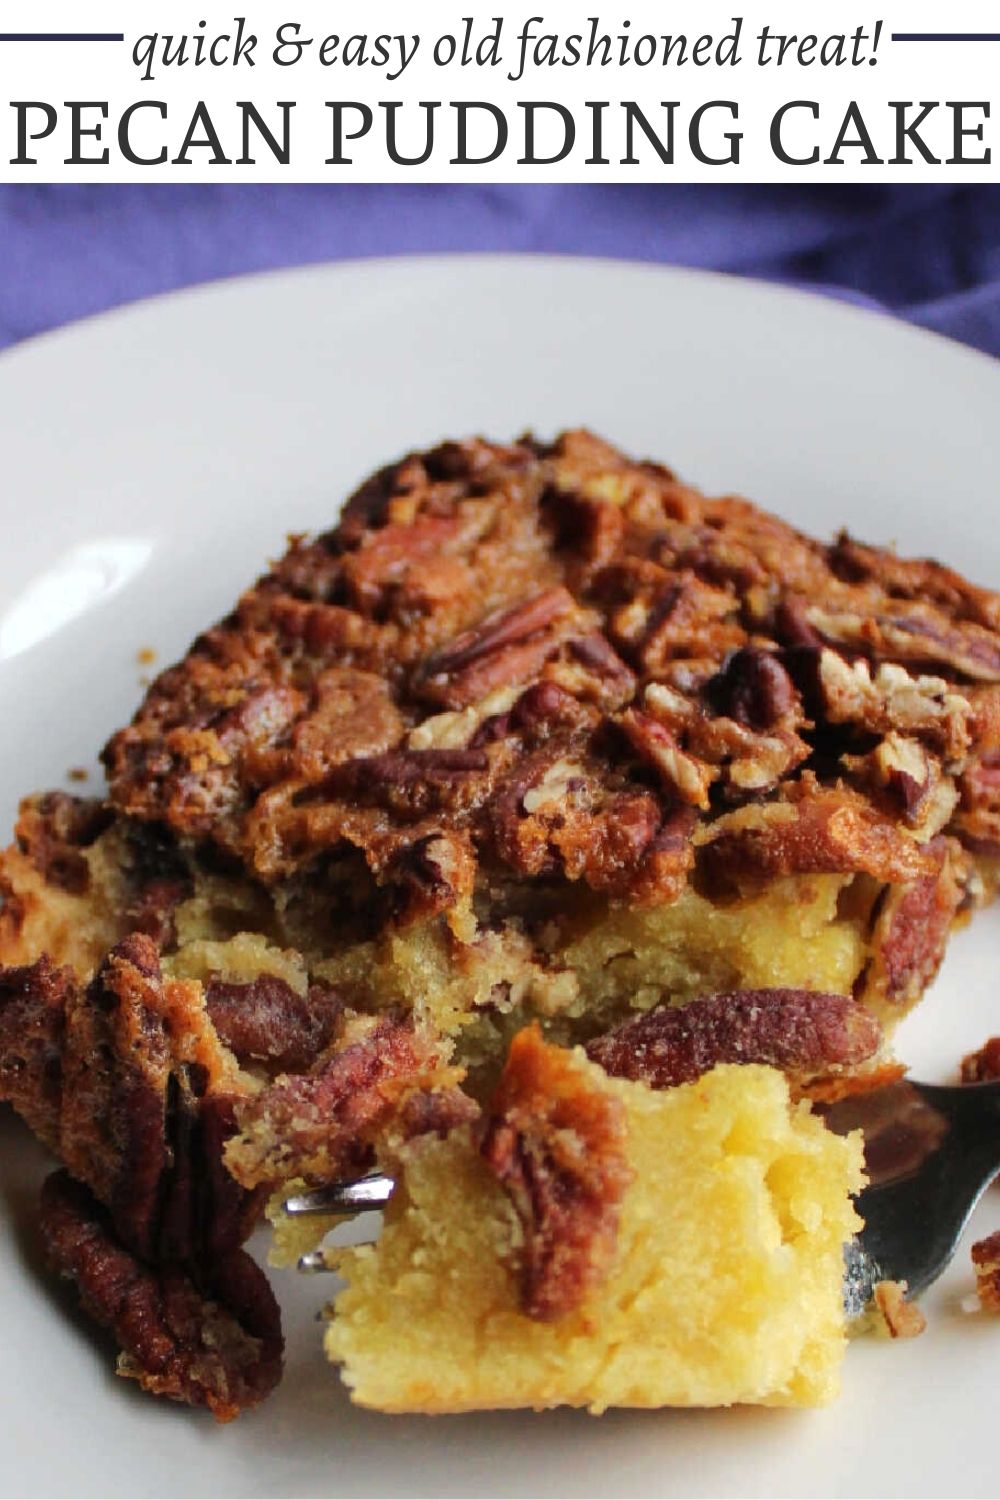 Old fashioned pecan pudding cake is a cross between a crustless pecan pie and a cake. It is a classic recipe from the 1930s that is quick and easy to make.